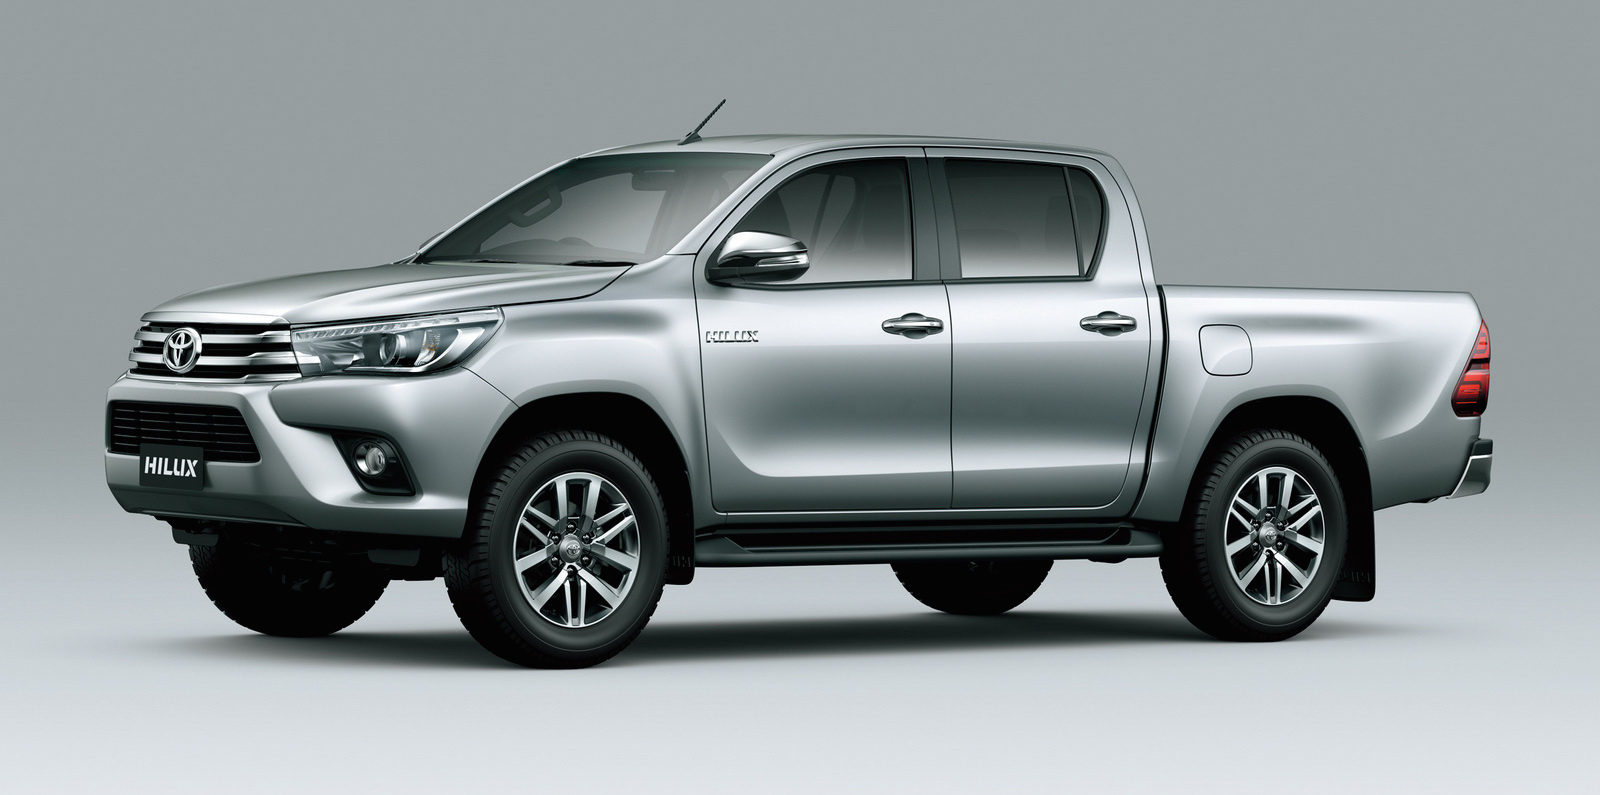 2016-toyota-hilux-double-cab-front-three-quarter-press-image